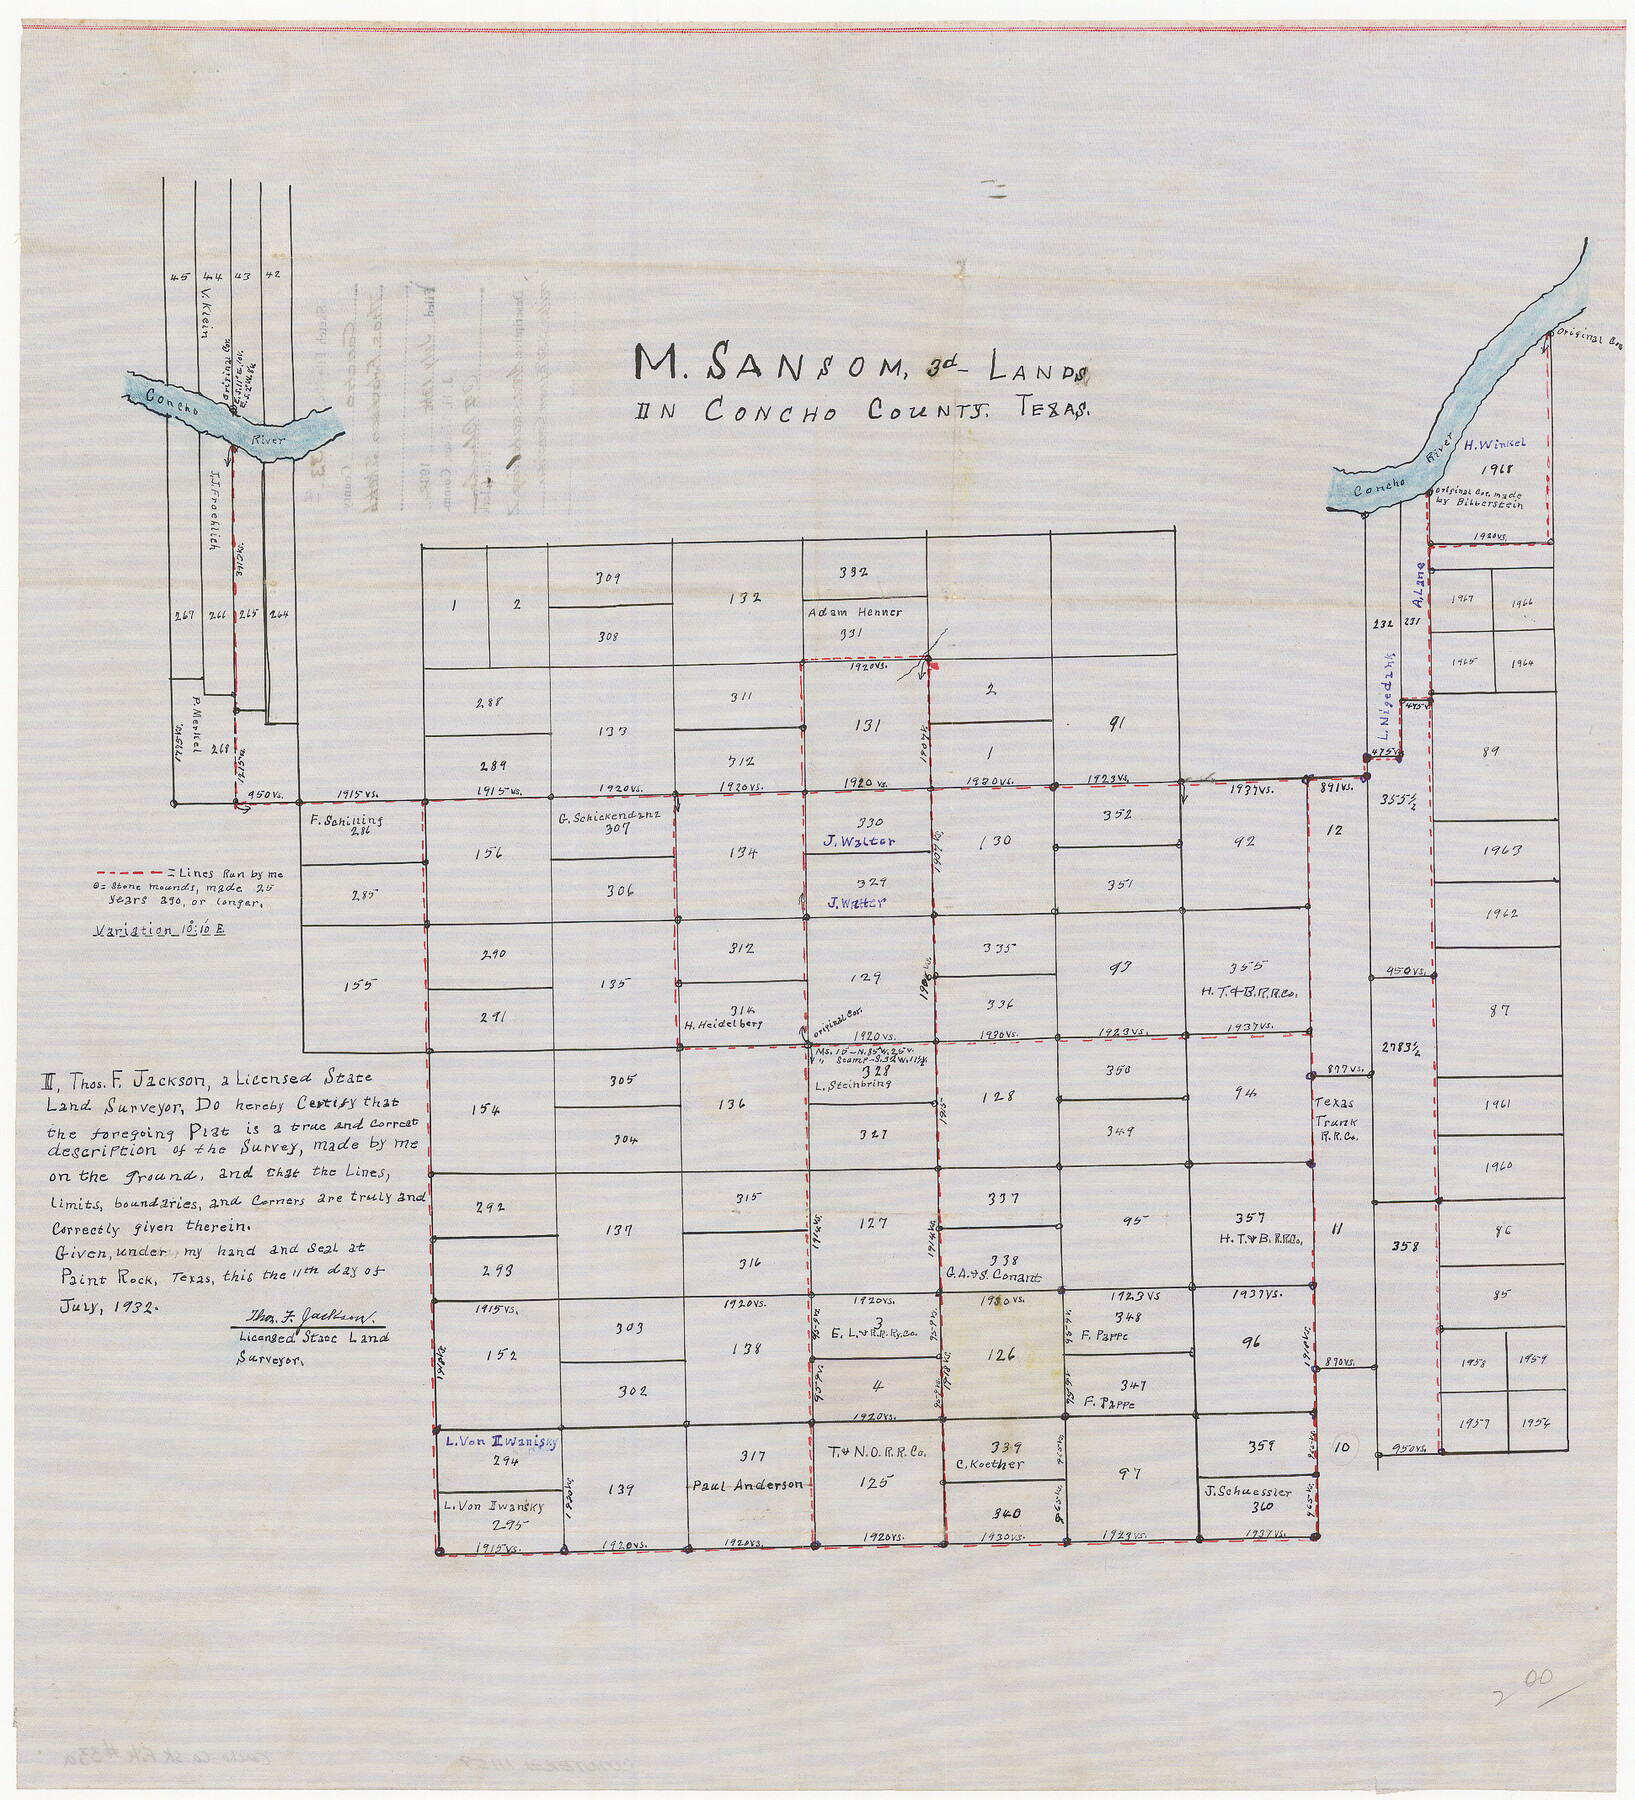 11159, Concho County Sketch File 33a, General Map Collection